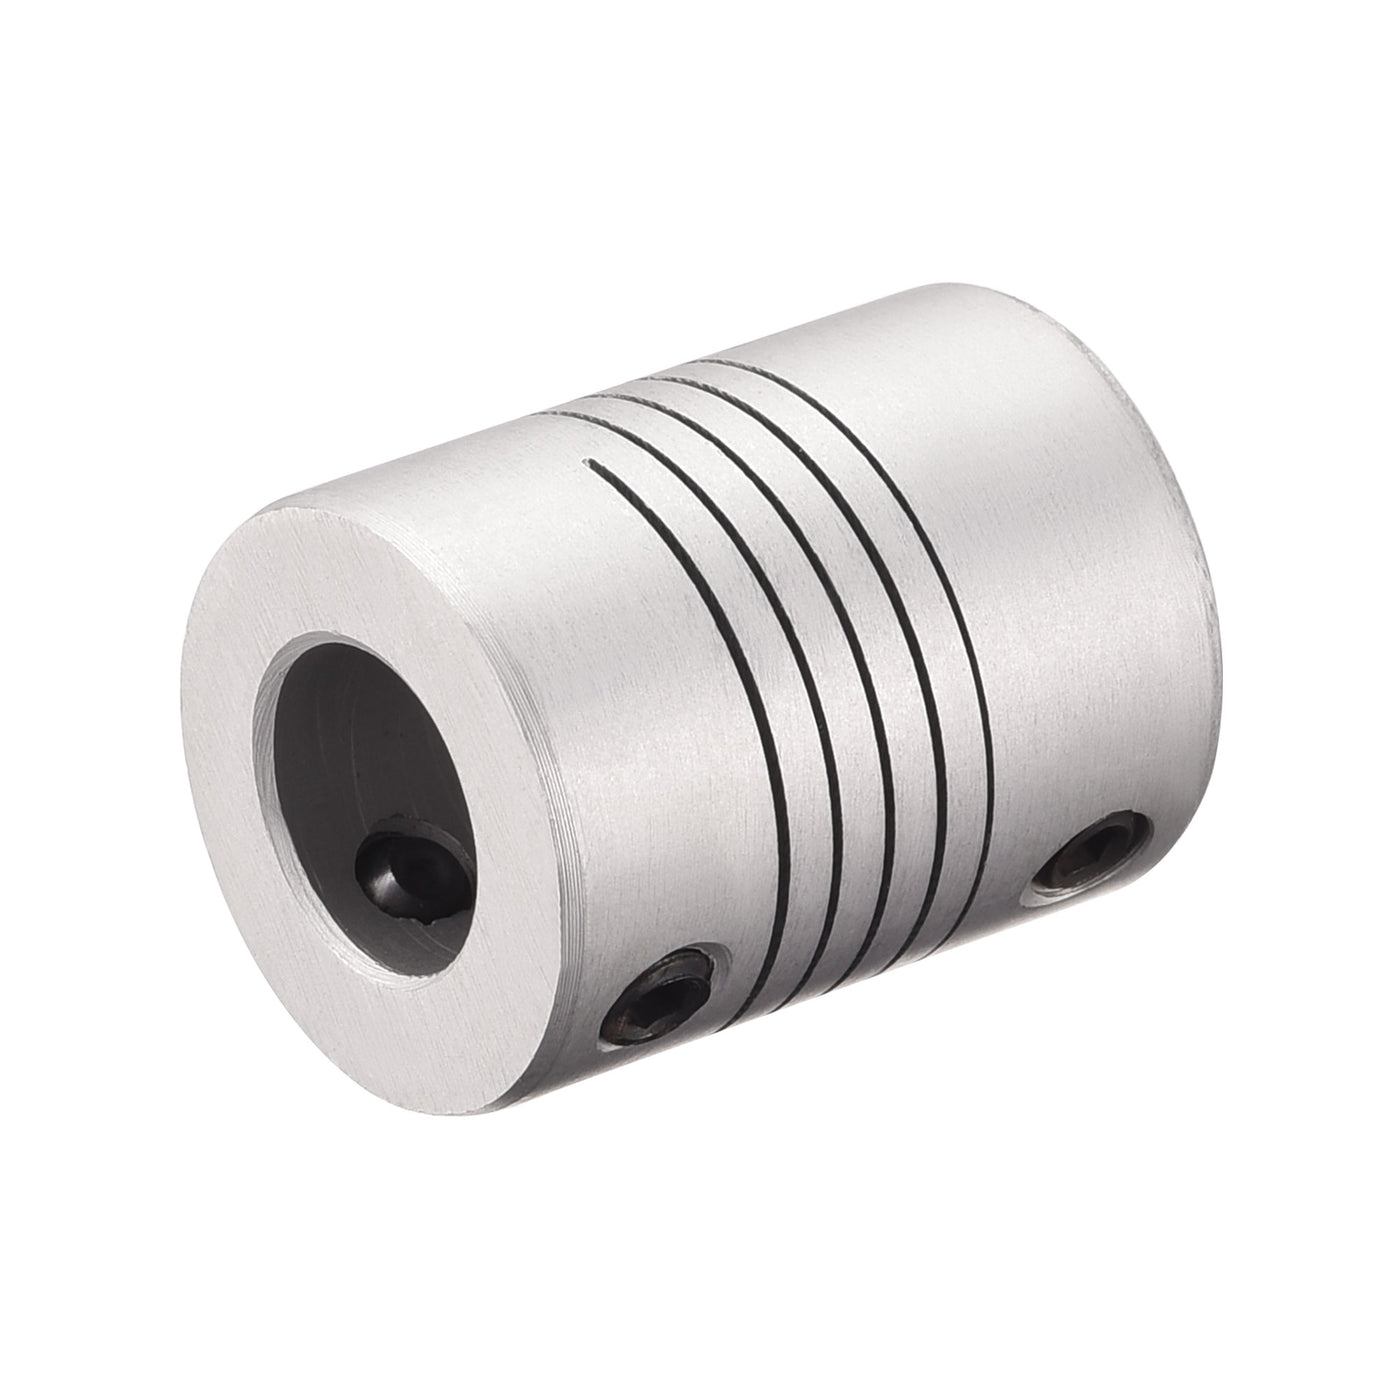 uxcell Uxcell 10mm to 10mm Aluminum Alloy Shaft Coupling Flexible Coupler L25xD19 Silver,5pcs